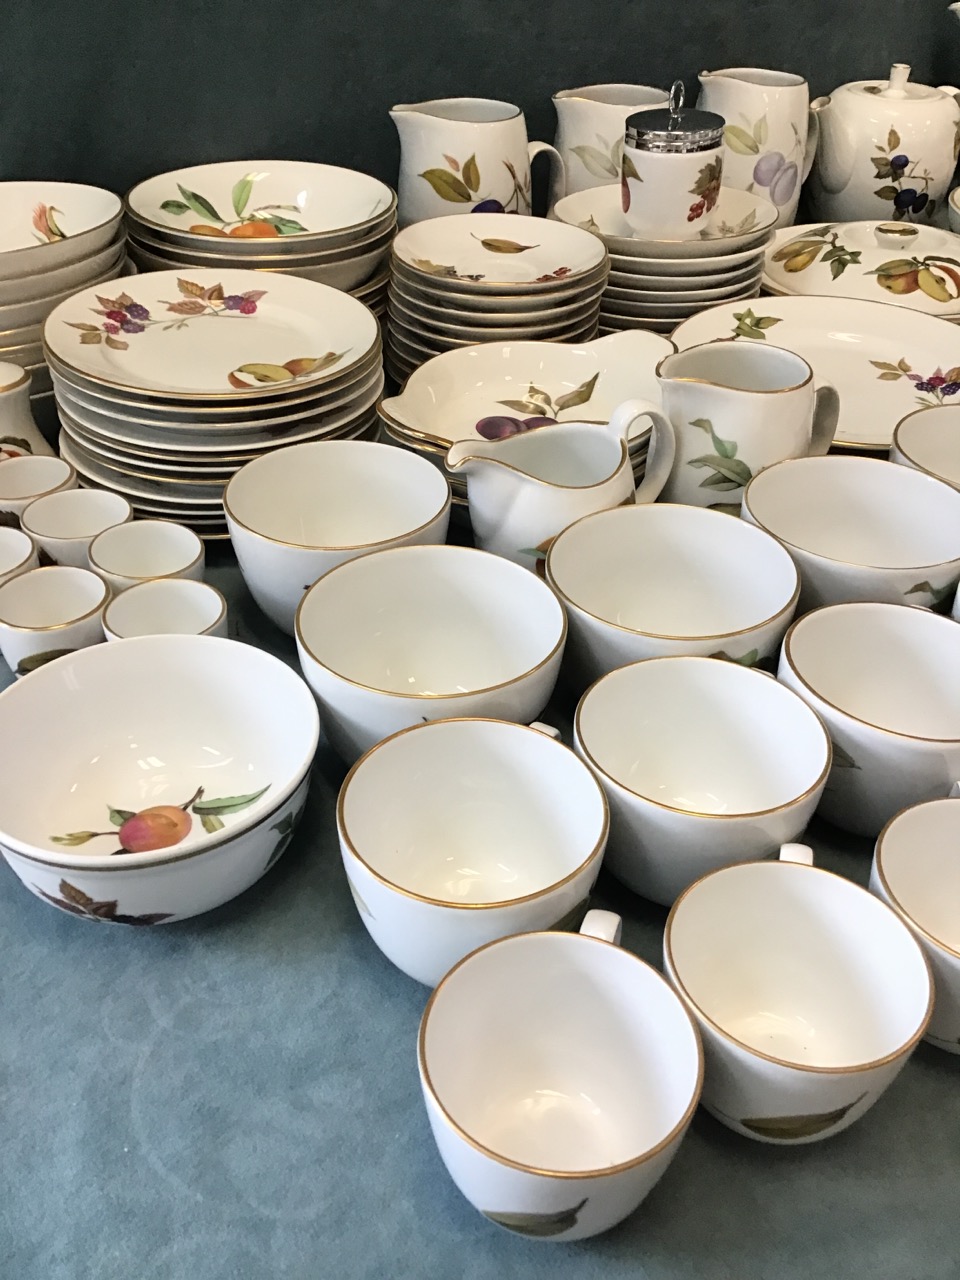 An extensive Royal Worcester service in the Evesham pattern - cups, saucers, teaplates, bowls, - Image 3 of 3